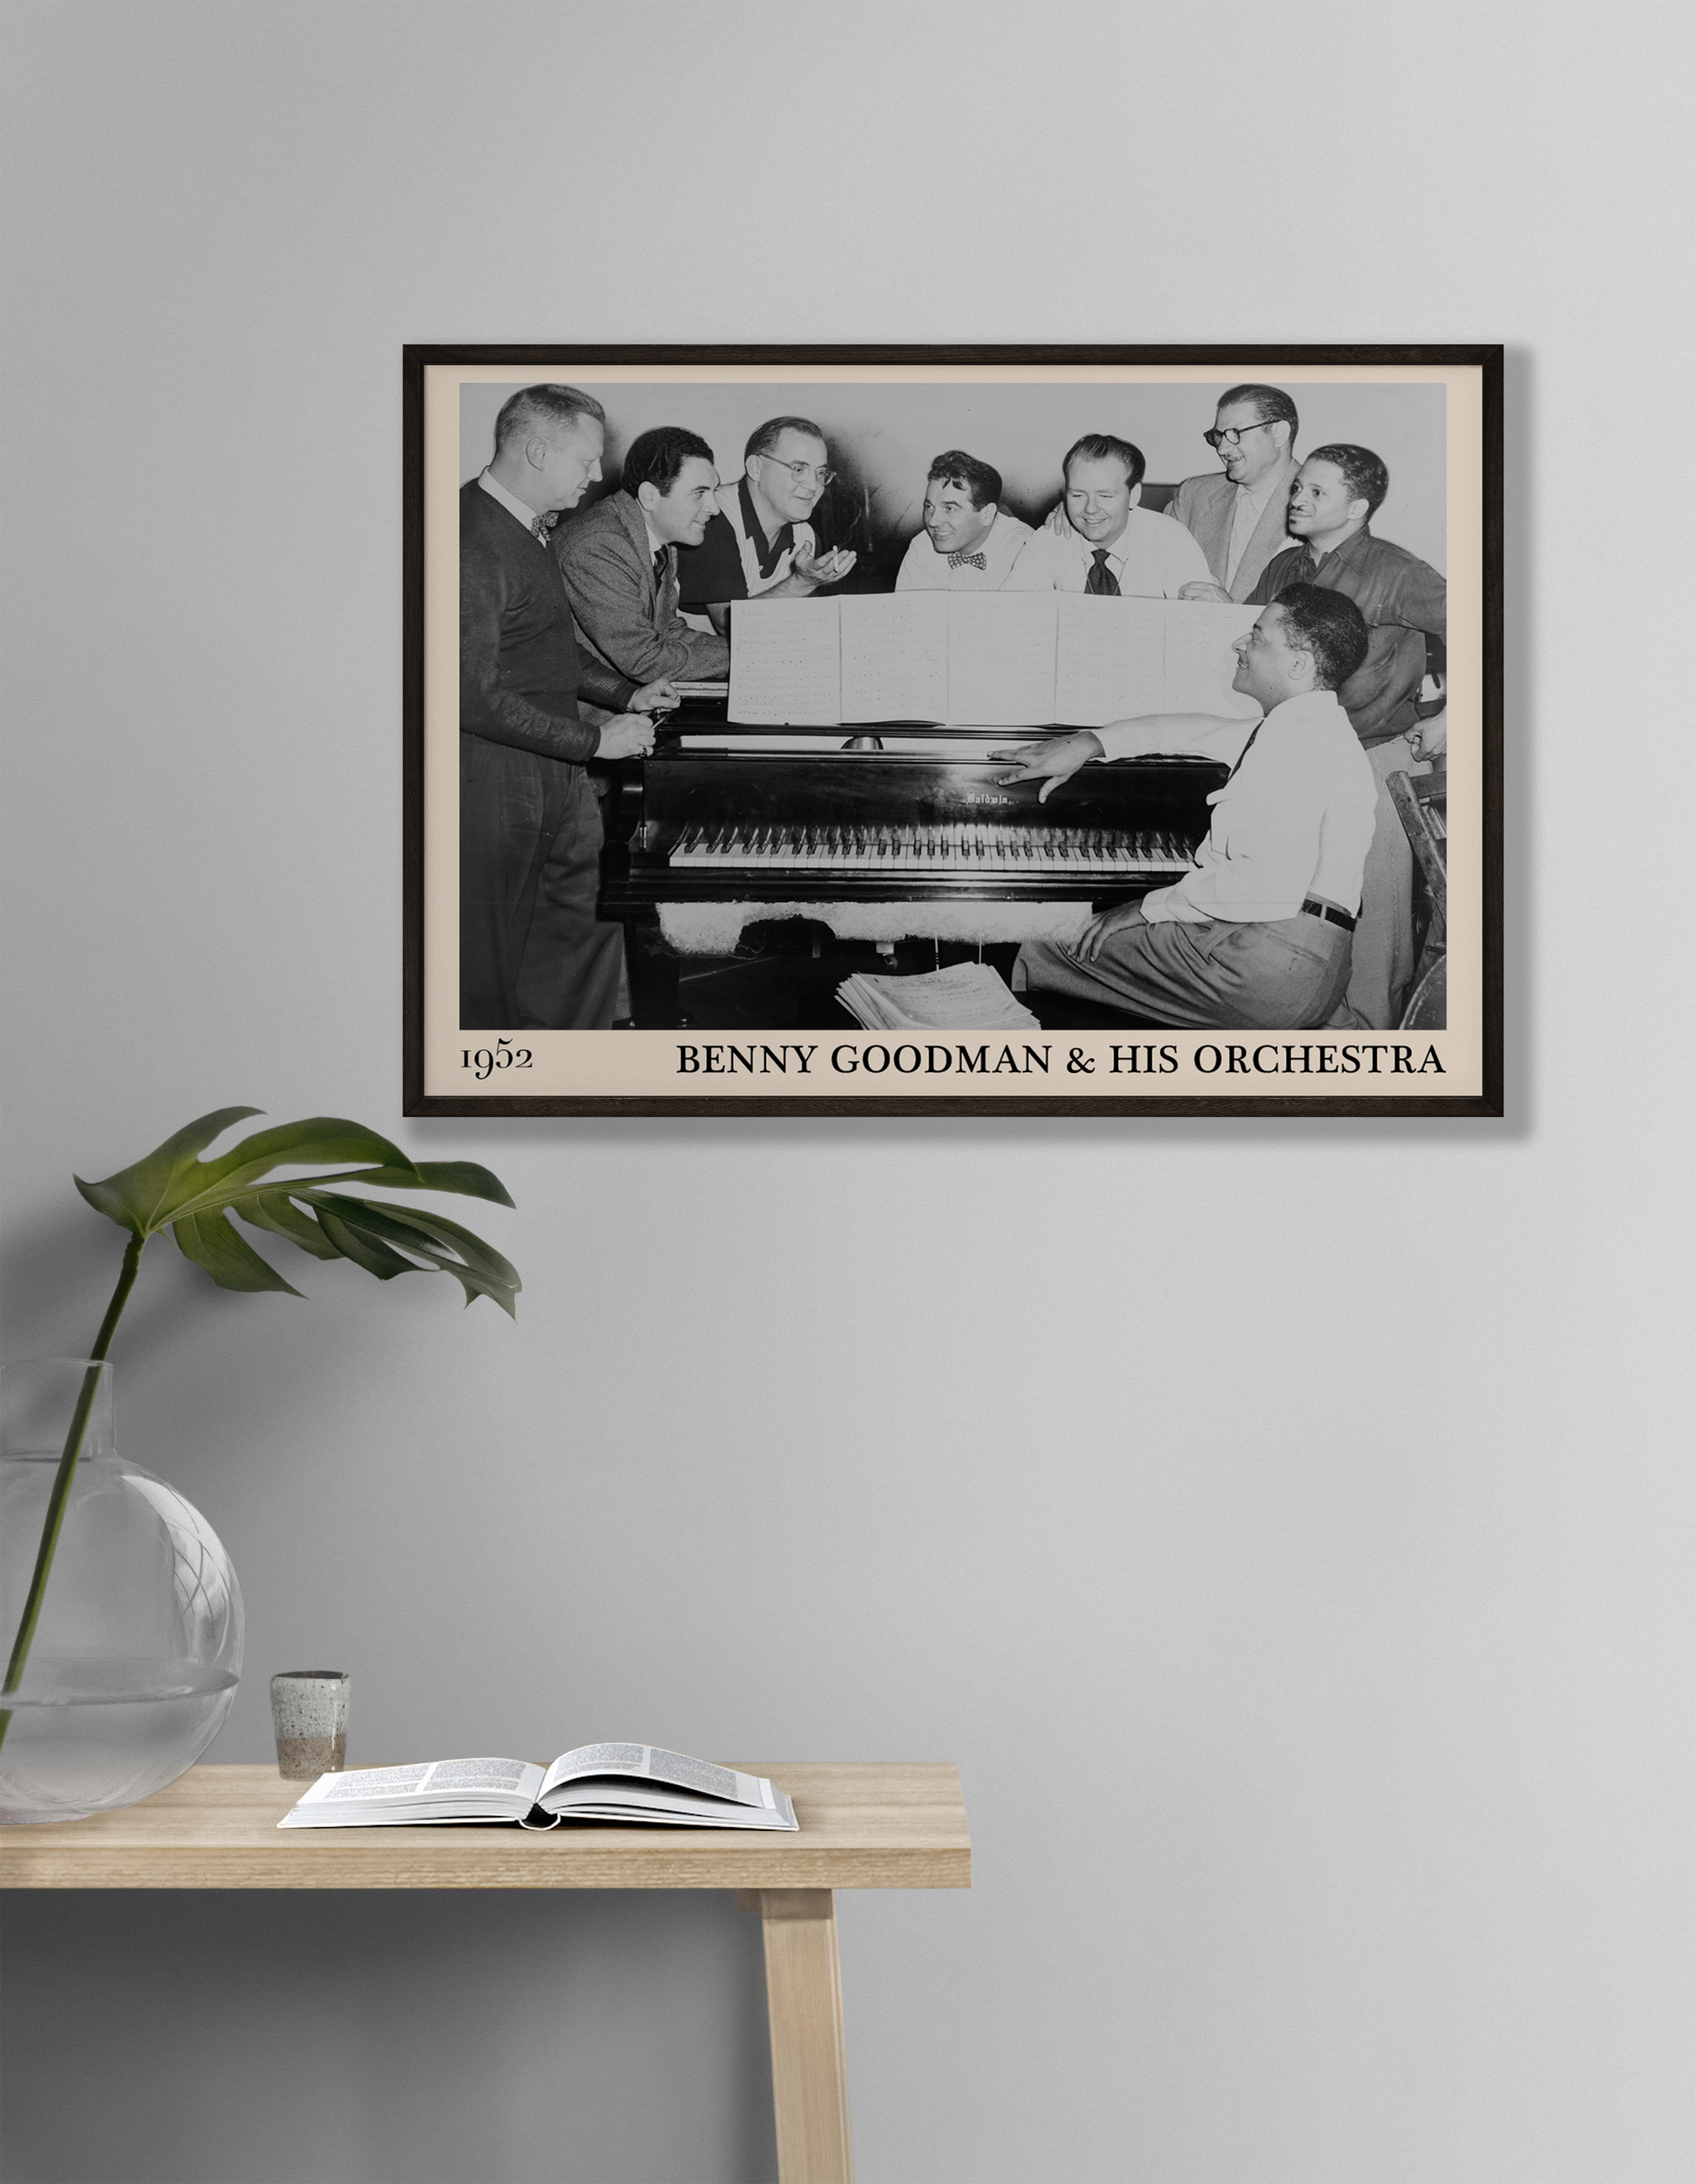 1952 photograph of Benny Goodman & his orchestra crafted into a black framed jazz poster. The poster is hanging on a grey living room wall.